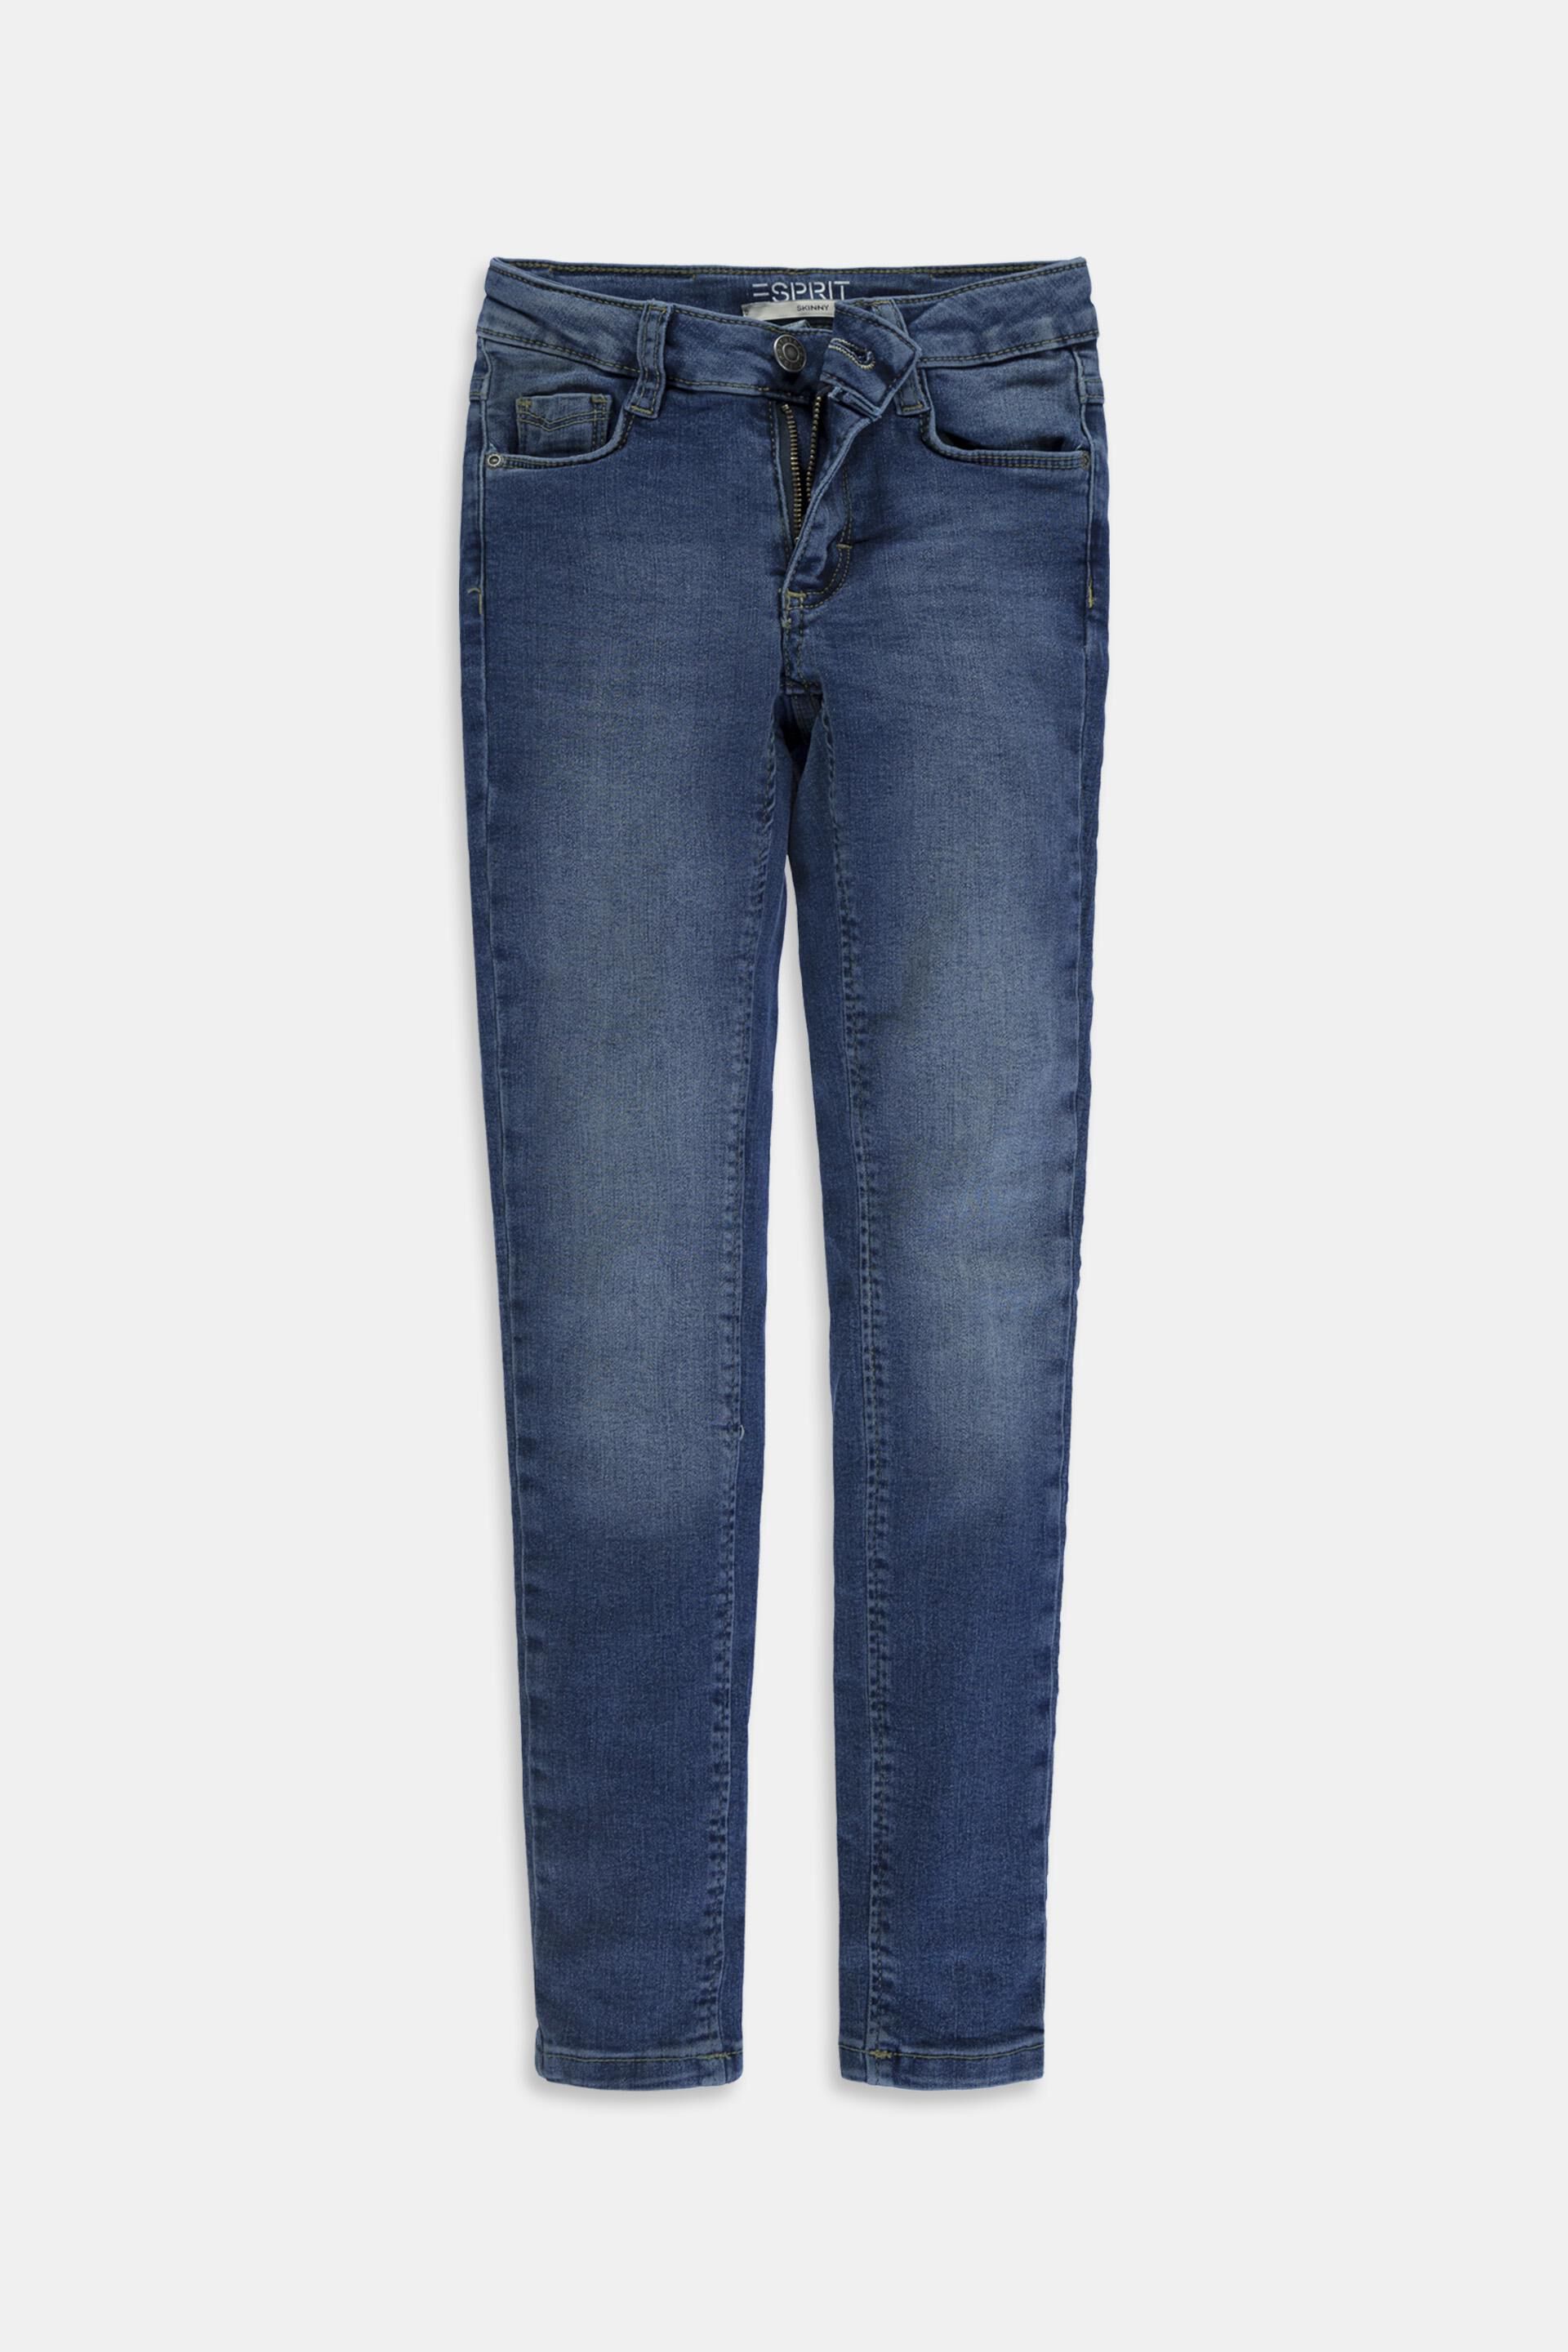 Esprit in Stretch an jeans waistband adjustable different widths available with